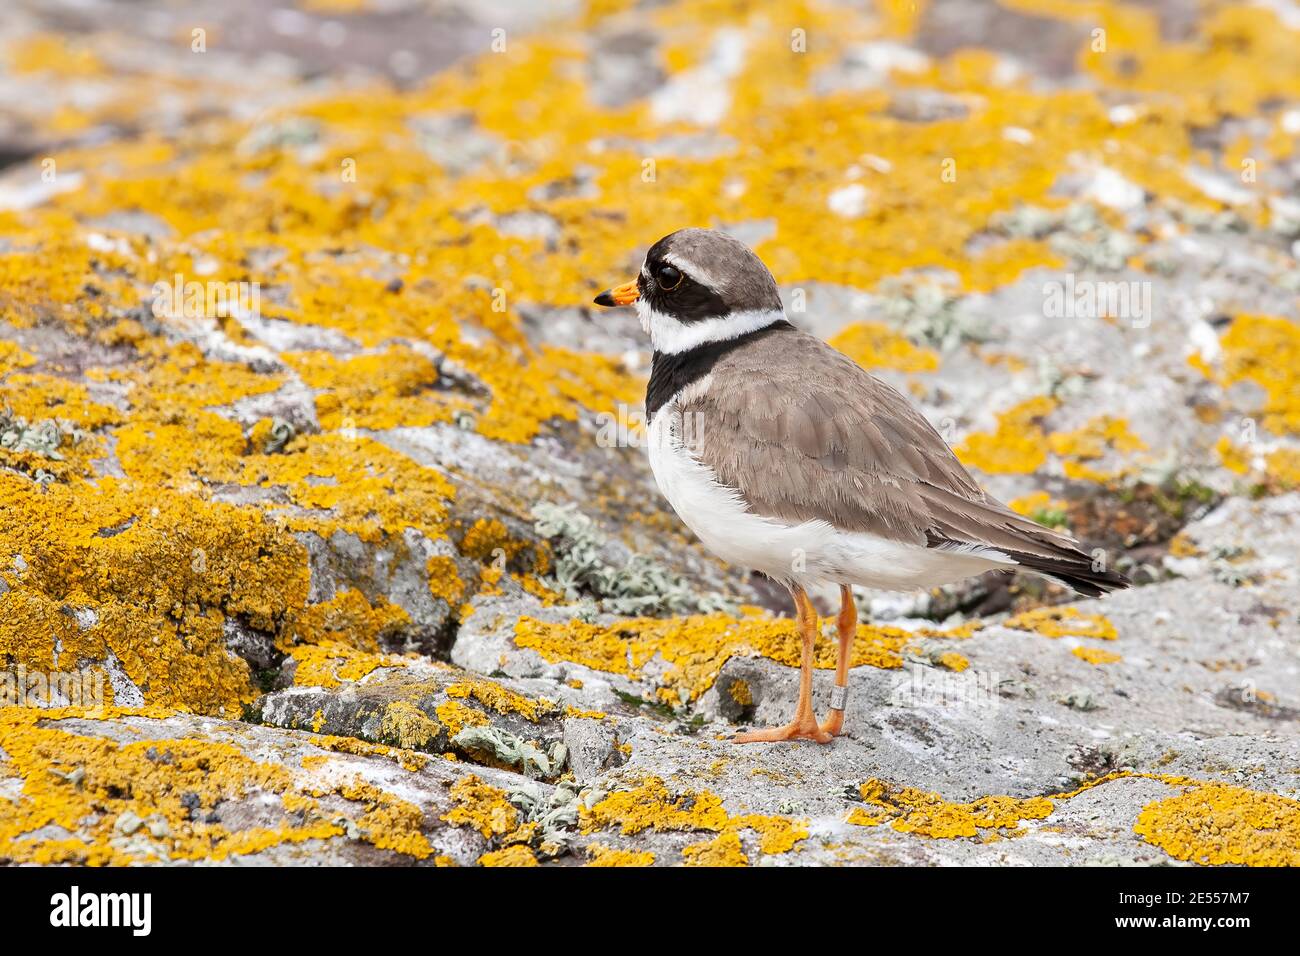 Common Ringed Plover, Charadrius hiaticula, single adult standing on ground among lichen-covered rocks, United Kingdom, 7 June 2008 Stock Photo